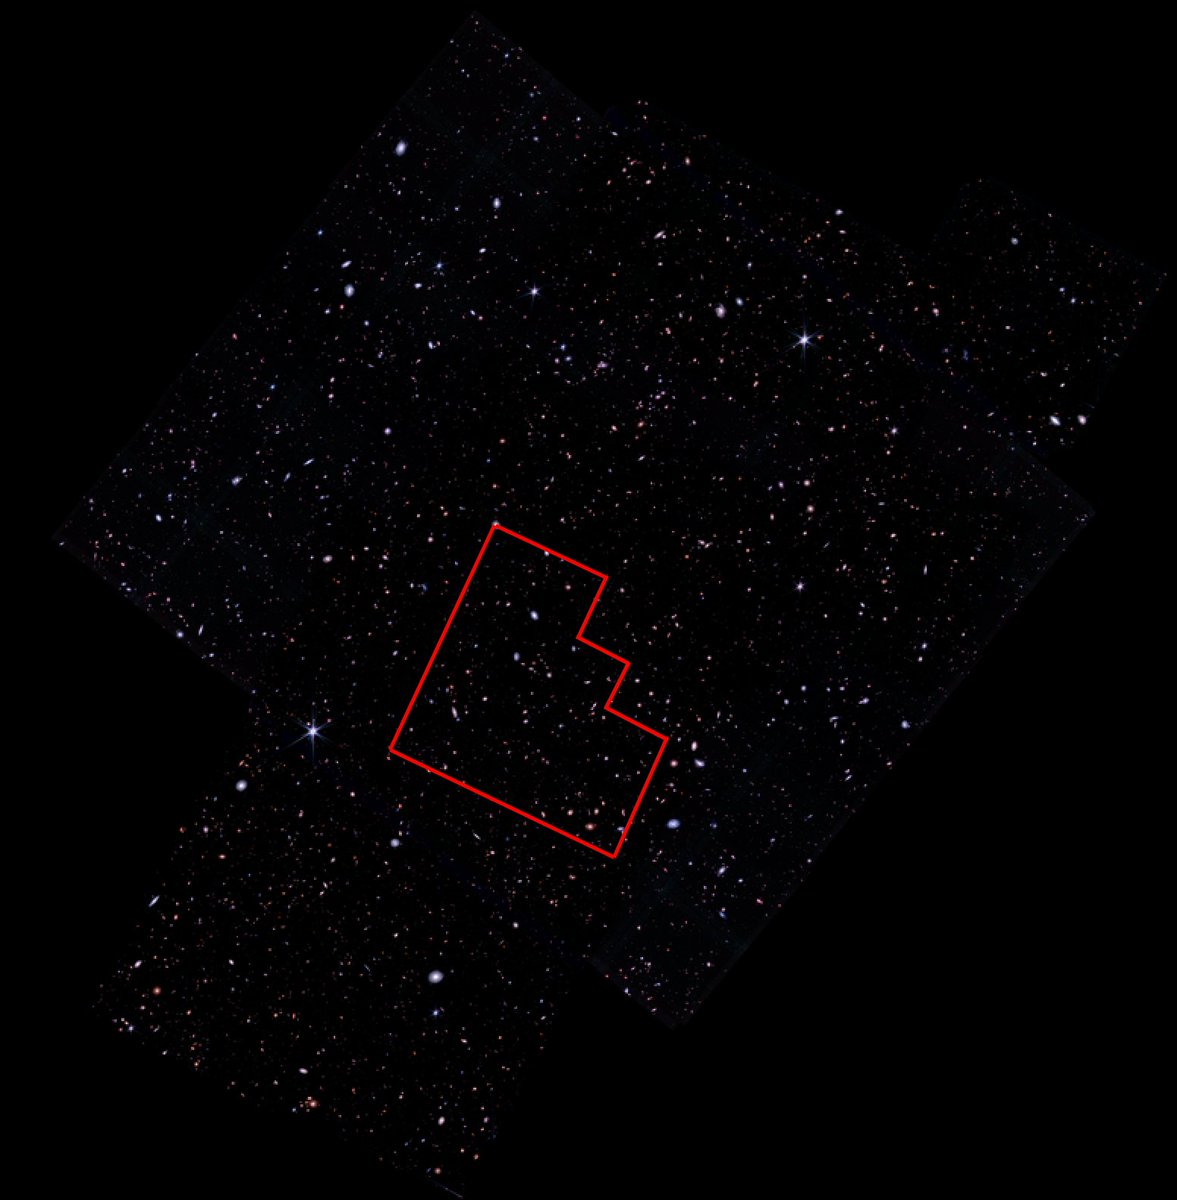 Here's the size of the Hubble Deep Field compared to our JADES GOODS-N region. The Hubble Deep Field was a watershed moment in the mid-90s for our understanding of the distant Universe. We're in the middle of an even more profound revolution in astronomy thanks to JWST.